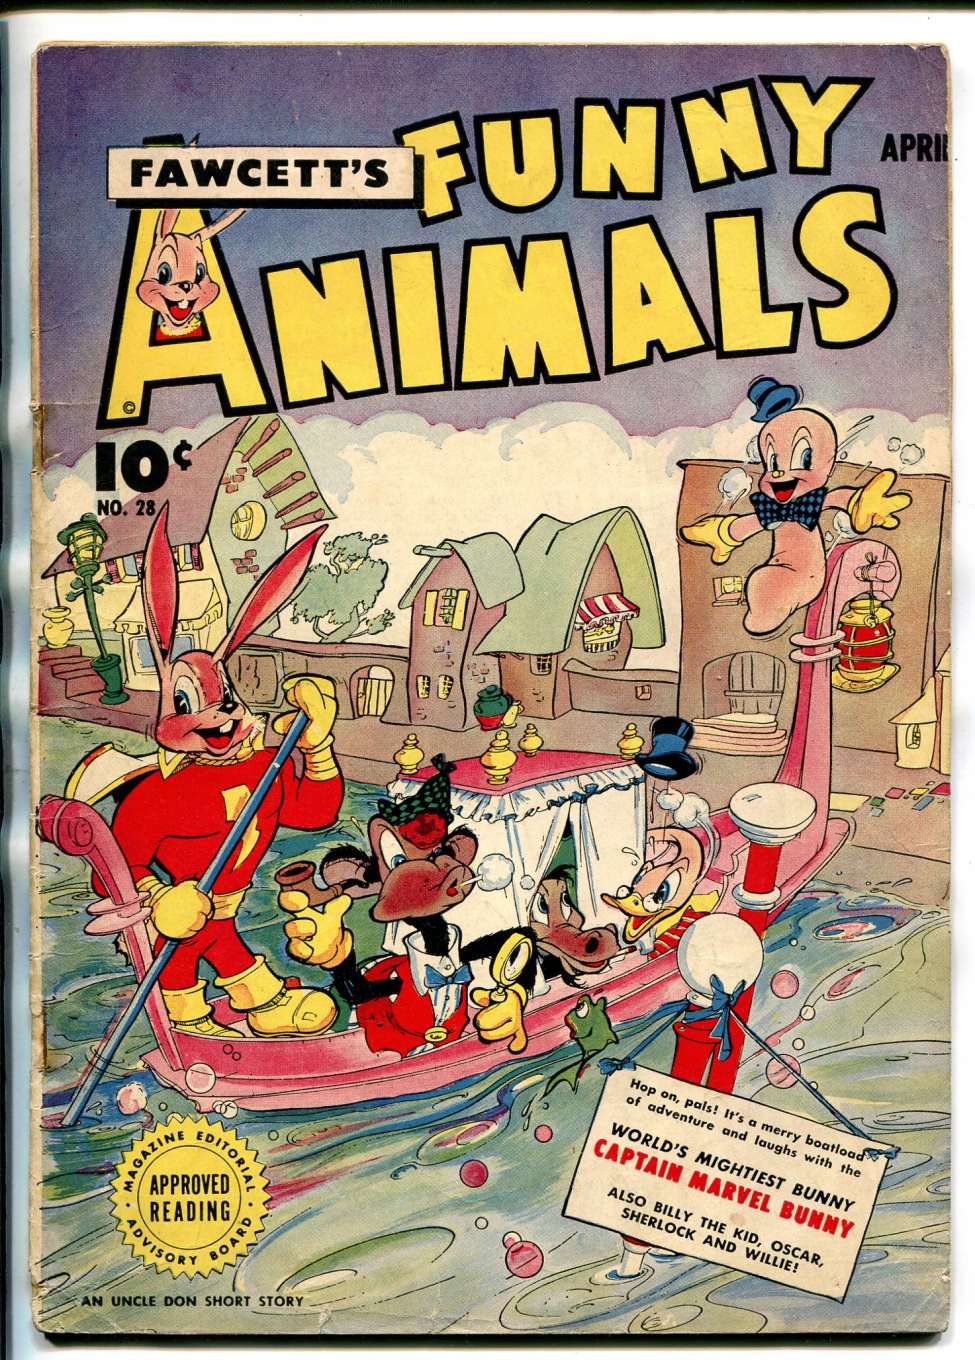 Book Cover For Fawcett's Funny Animals 28